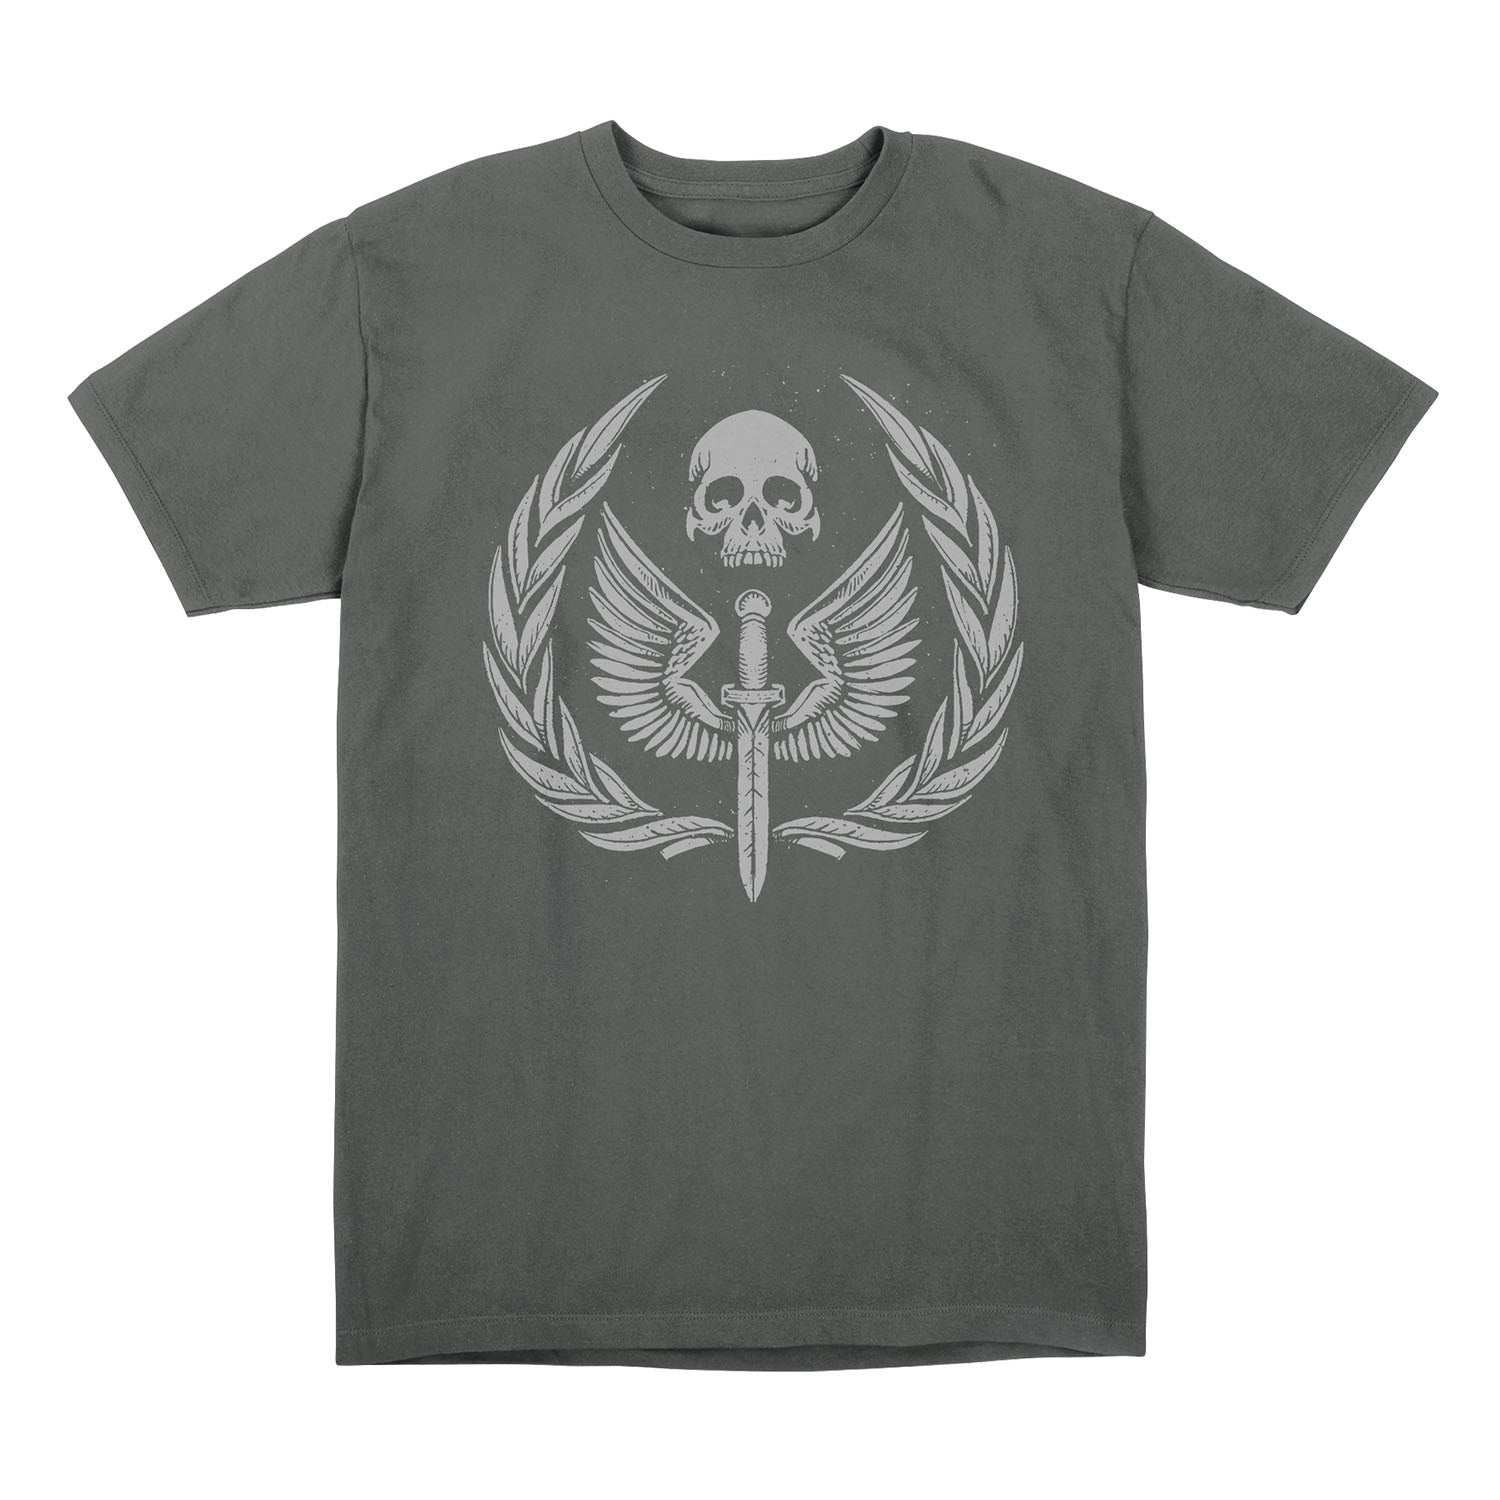 Call of Duty Task Force 141 Distressed Thyme T-Shirt - Front View